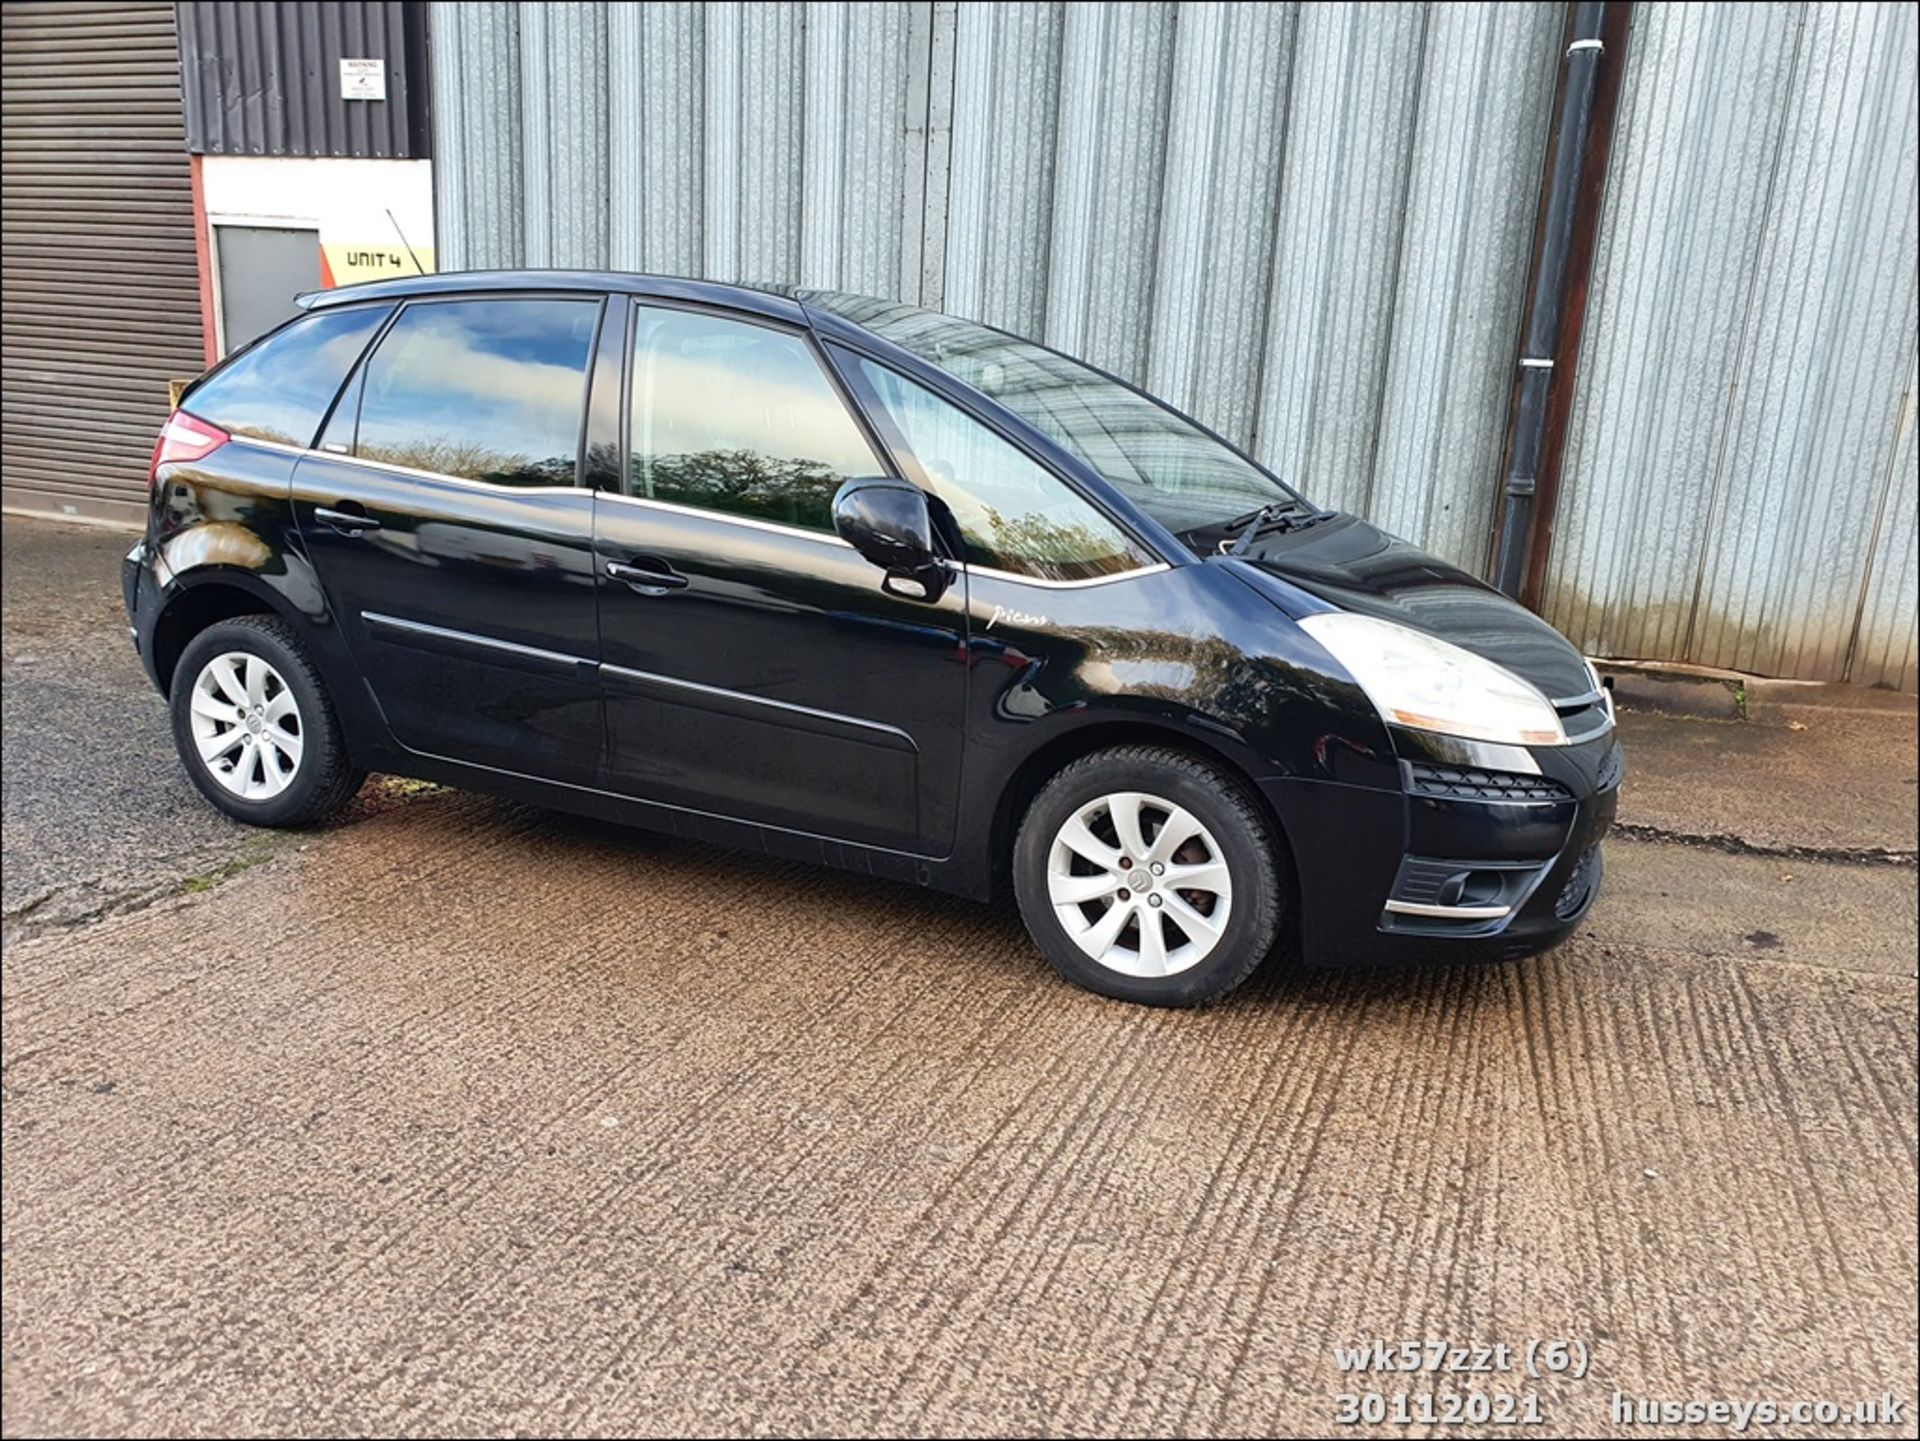 07/57 CITROEN C4 PICASSO 5 EXCL HDI EGS - 1560cc 5dr MPV (Black, 120k) - Image 5 of 29